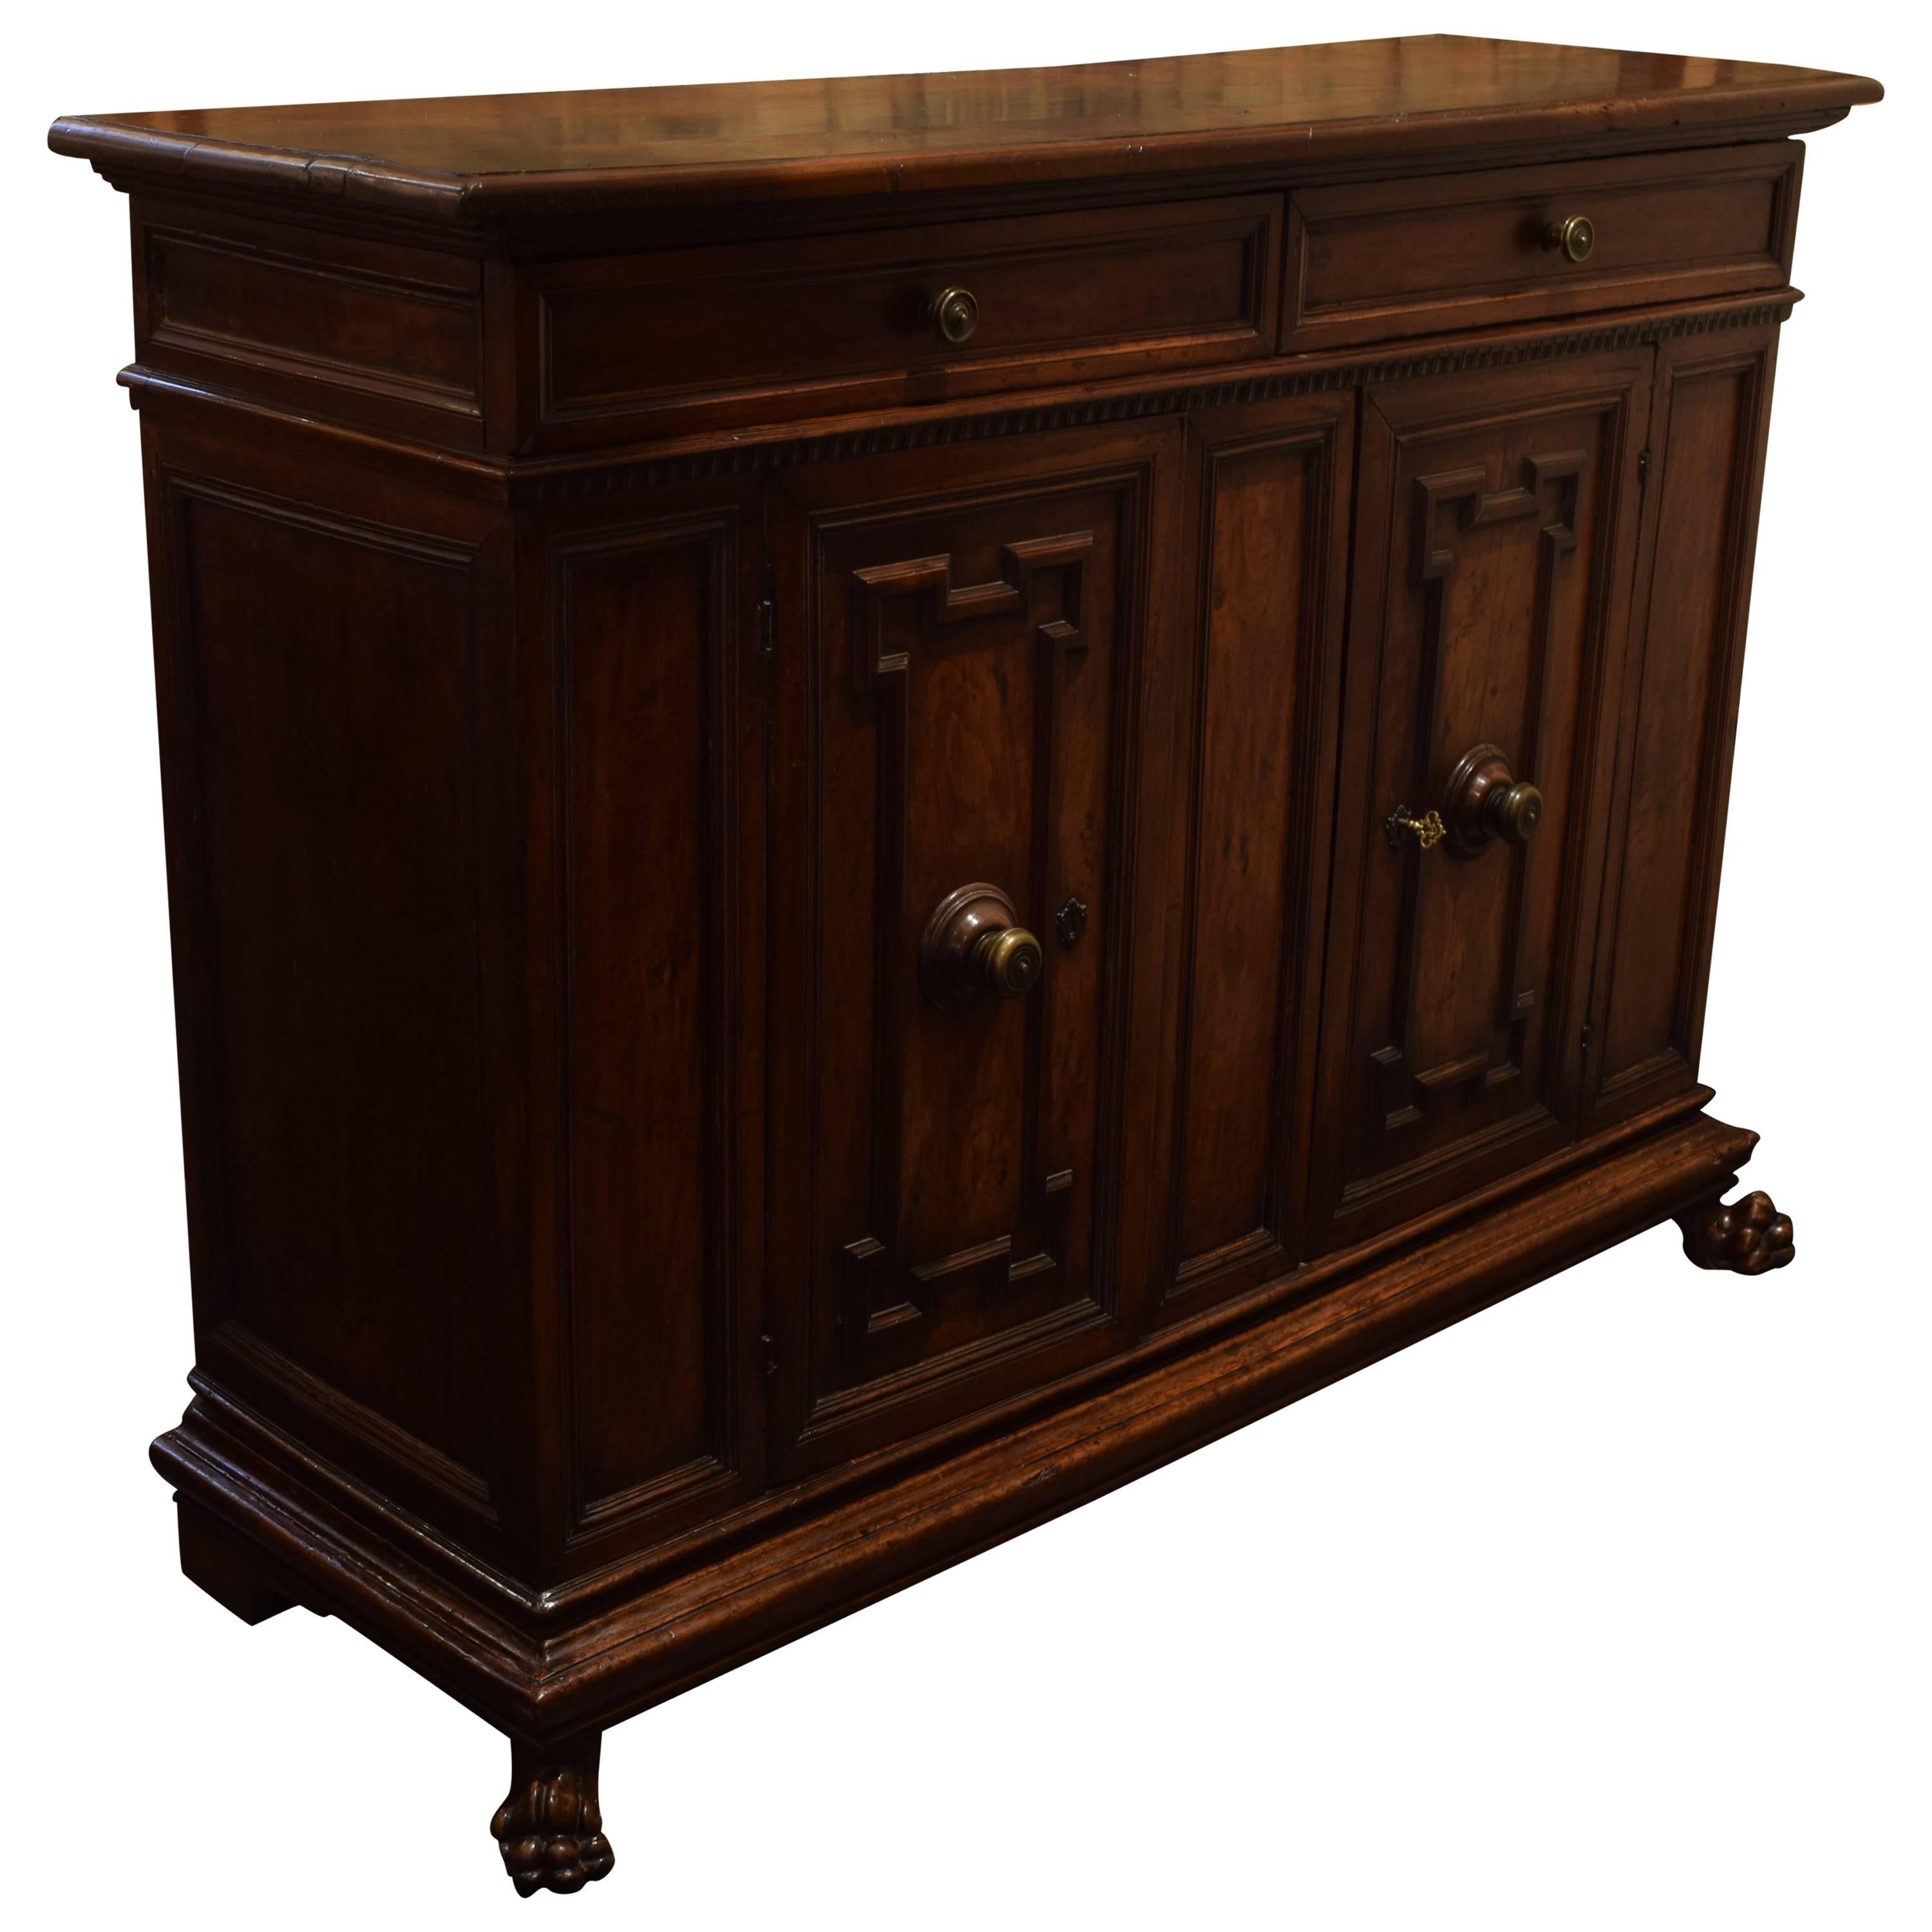 Of robust scale, the rectangular top with molded edge above a conforming case housing two drawers, the cabinet with two panelled doors opening to reveal a shelf, raised on a plinth form base and resting on large paw feet, with period bronze hardware